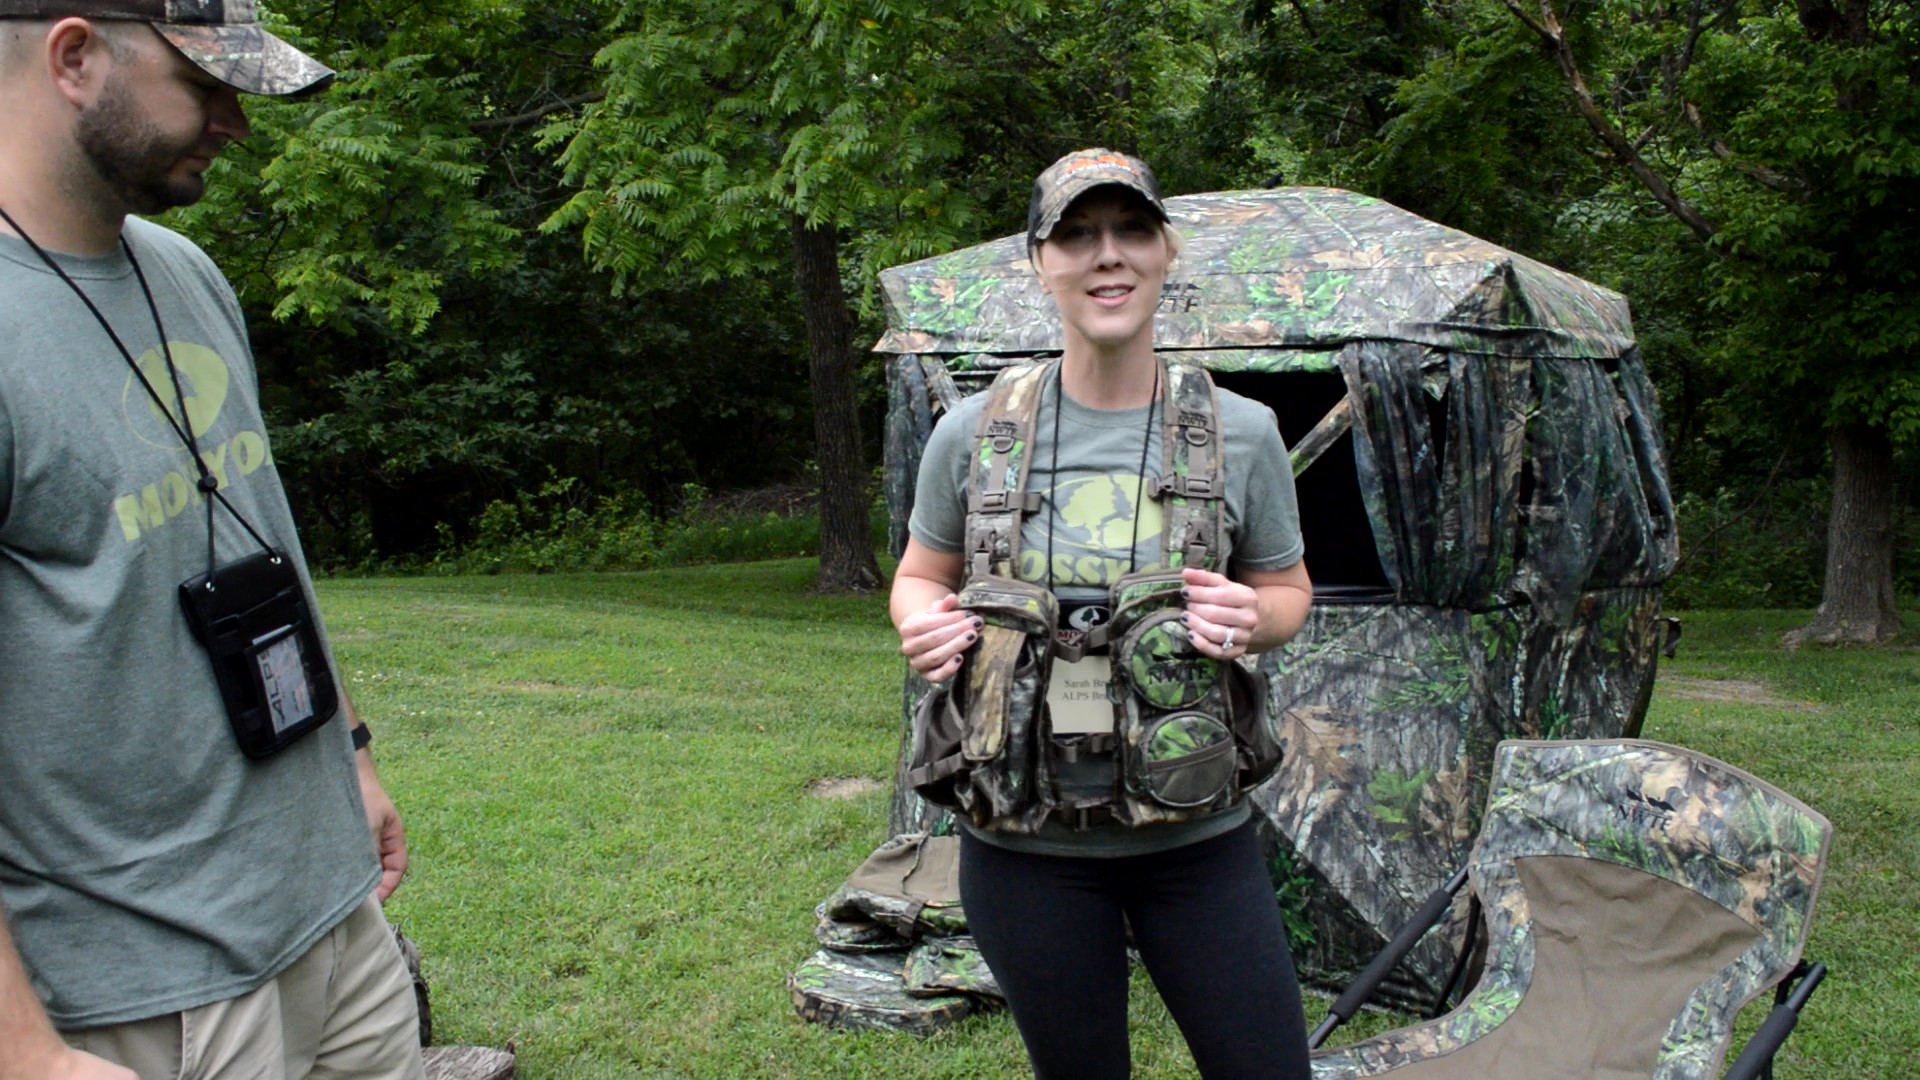 Sarah from Alps Outdoorz shows off the new-for-2017 Long Spur turkey vest. Built for the hunter who prefers to hunt on the move, this is lightweight already at 3lbs, but all its components are modular. The shoulder harness, rear game bag, padded waist belt, and call pockets are all removable allowing hunters to customize their vest. Best of all, the large lumbar pack zips off for those run-and-gun hunters who really want to travel light. (Photo: Kristin Alberts)